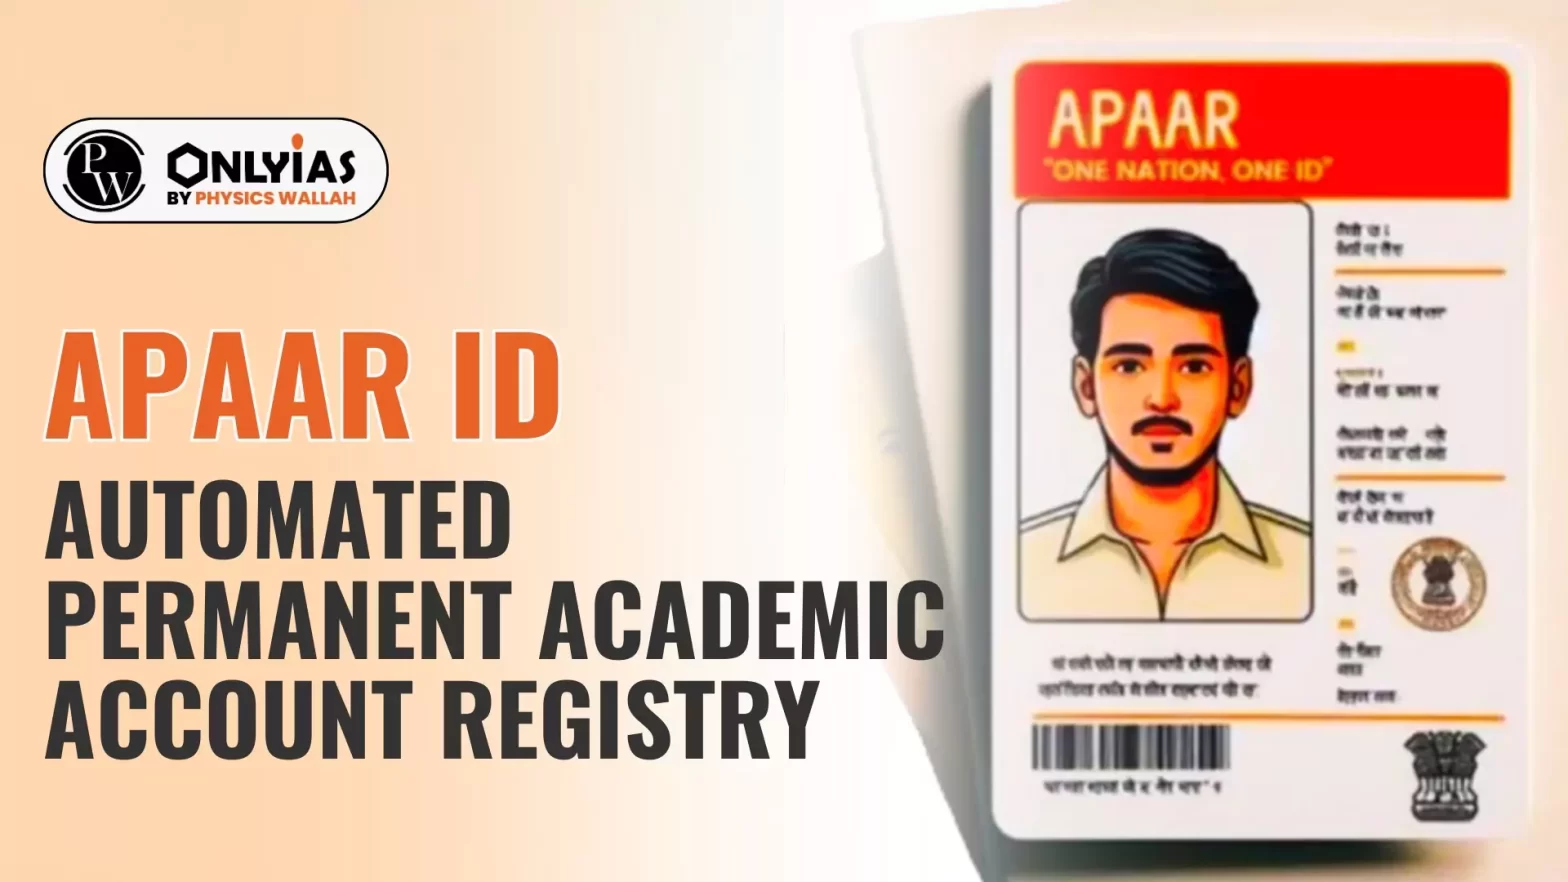 APAAR ID: Automated Permanent Academic Account Registry